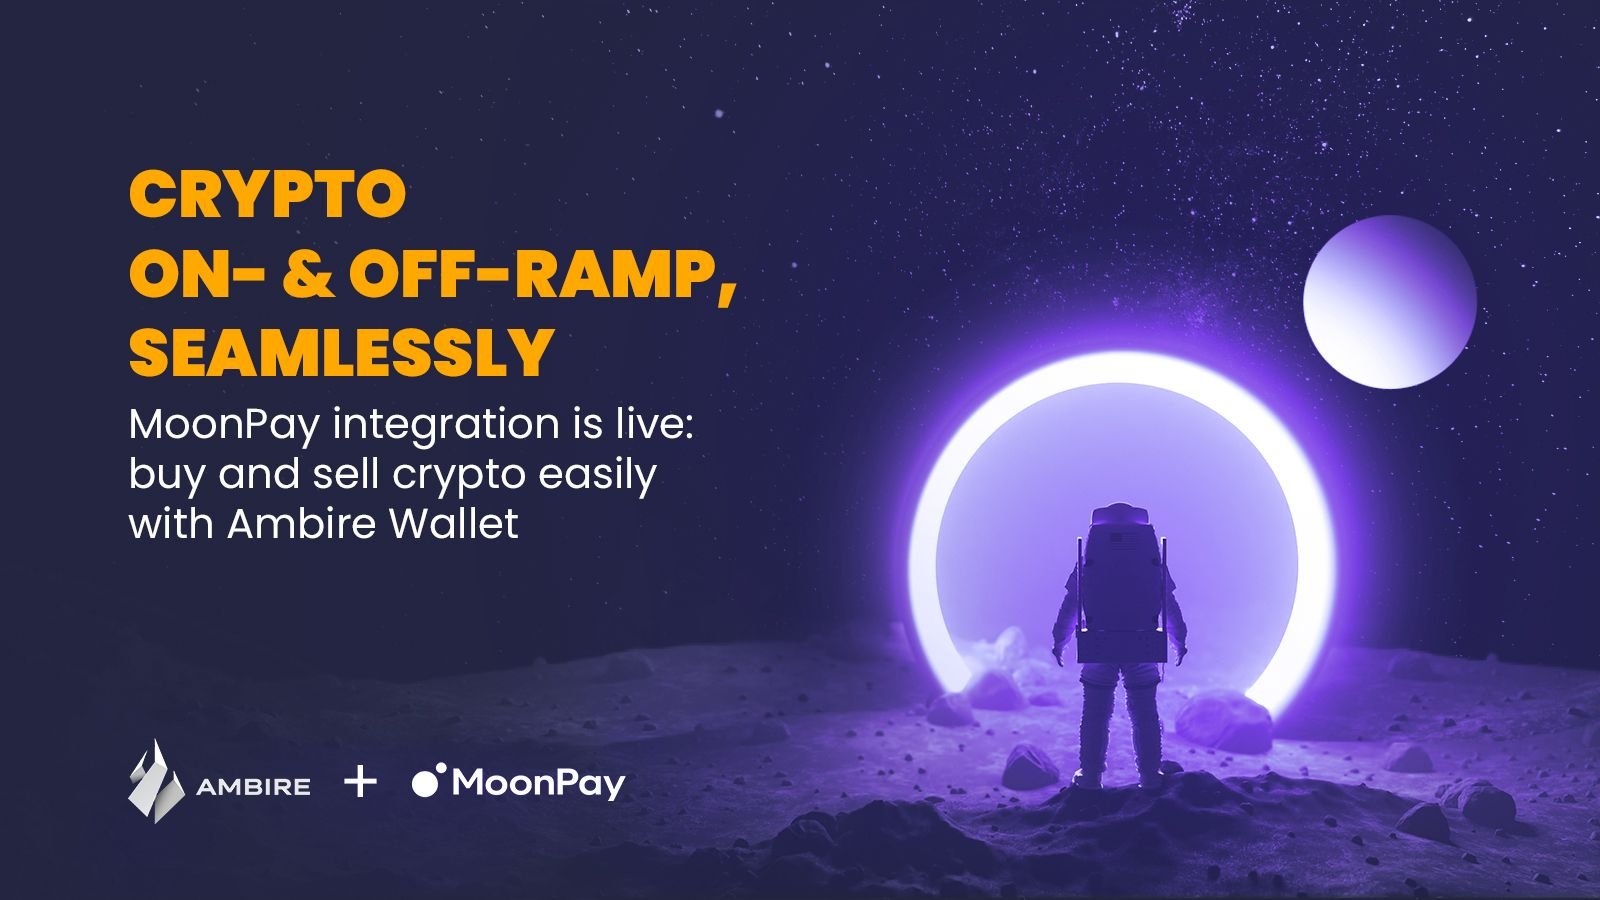 MoonPay Integration Released: Easily On- & Off-ramp Crypto with Ambire